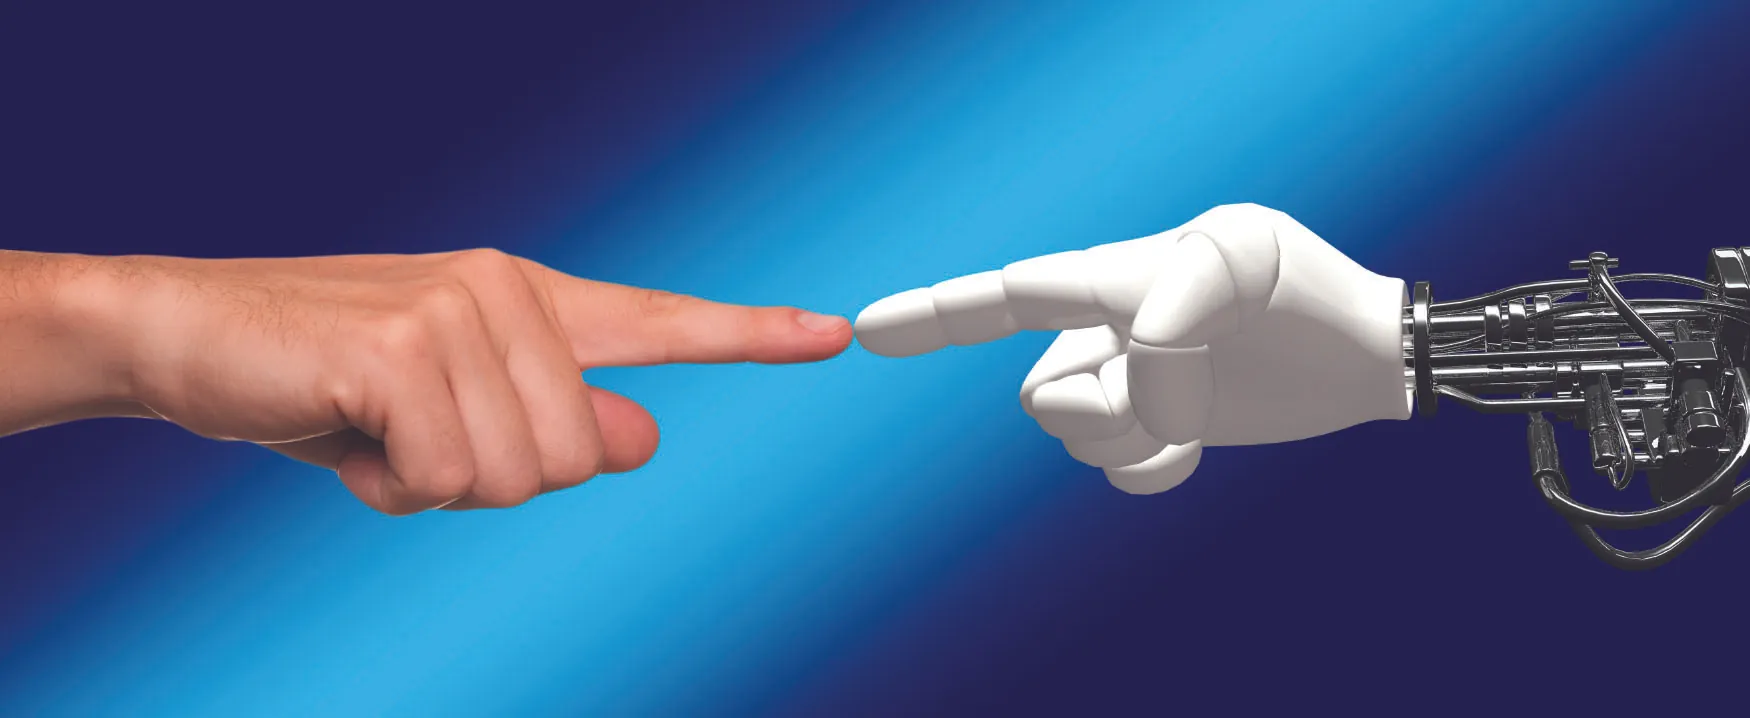 This image shows a human hand on the left and a robot hand on the right. Their index fingers are touching in the middle.